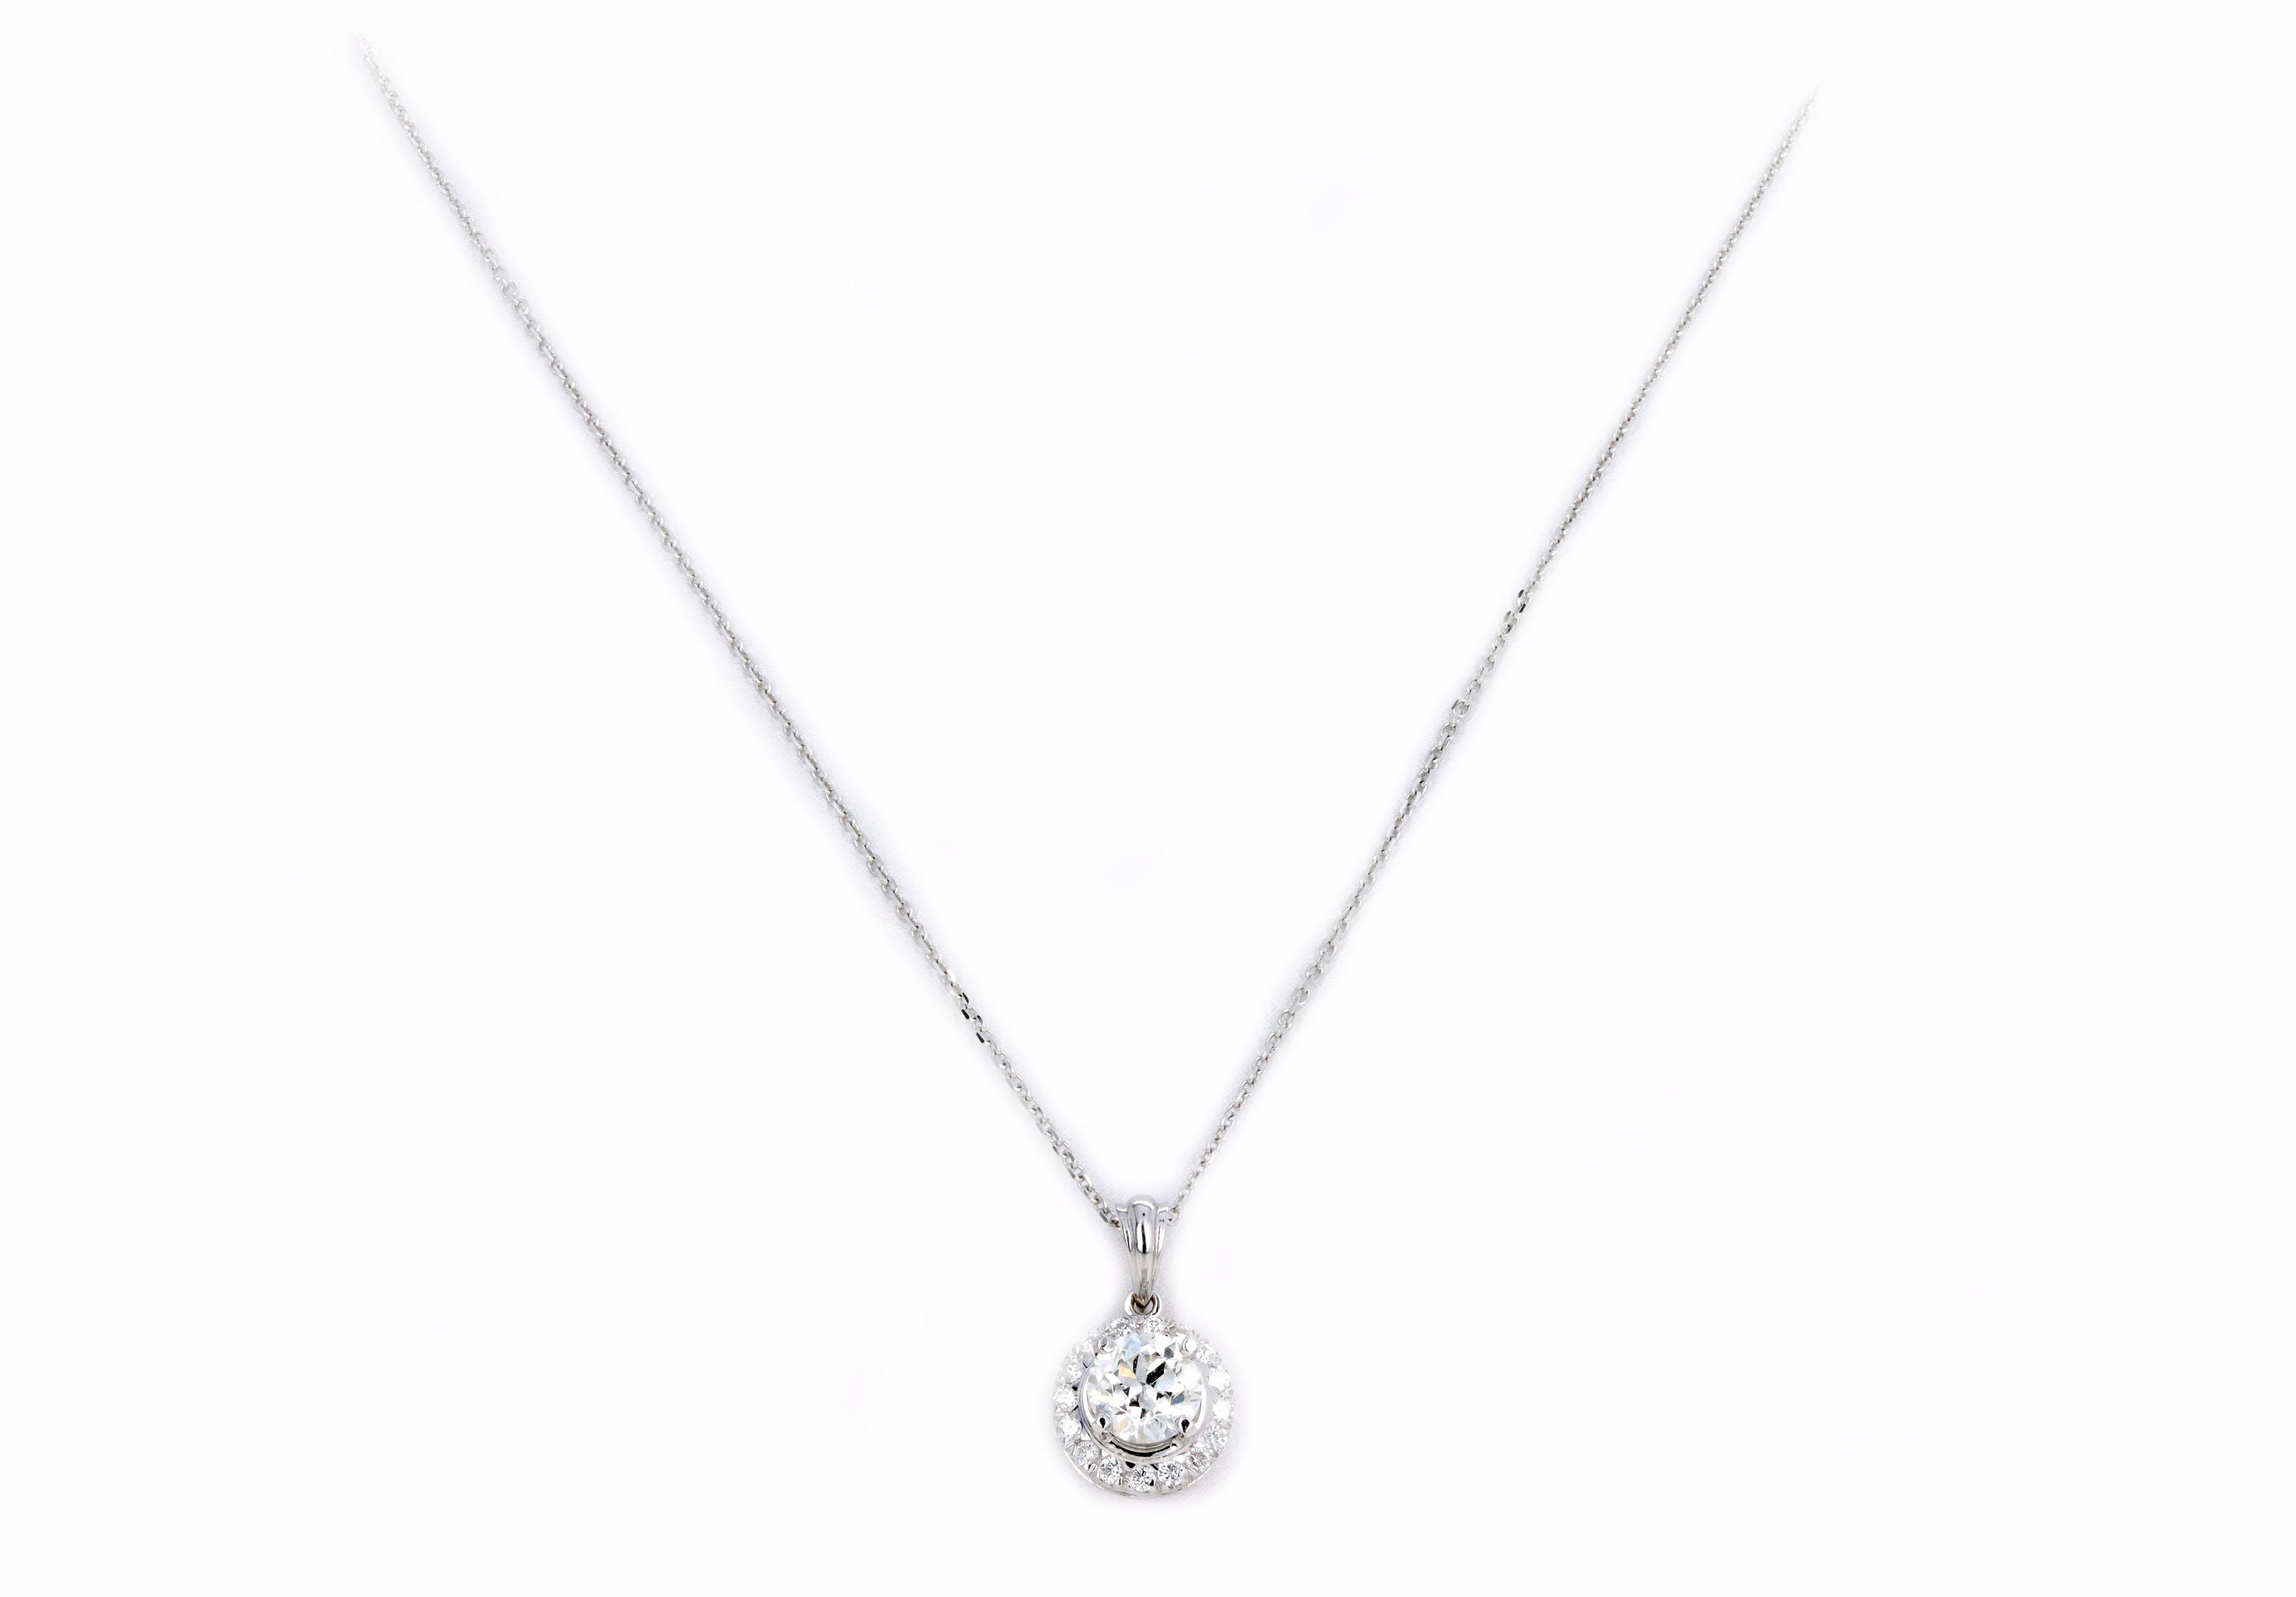 Era: Modern Estate 

Pendant Composition: 18K White Gold

Primary Stone: Old European Cut Diamond

Carat Weight: Approximately 1.10 Carats

Color/Clarity: I / SI2

Accent Stone: Sixteen Round Brilliant Cut Diamonds

Carat Weight: Approximately 0.15